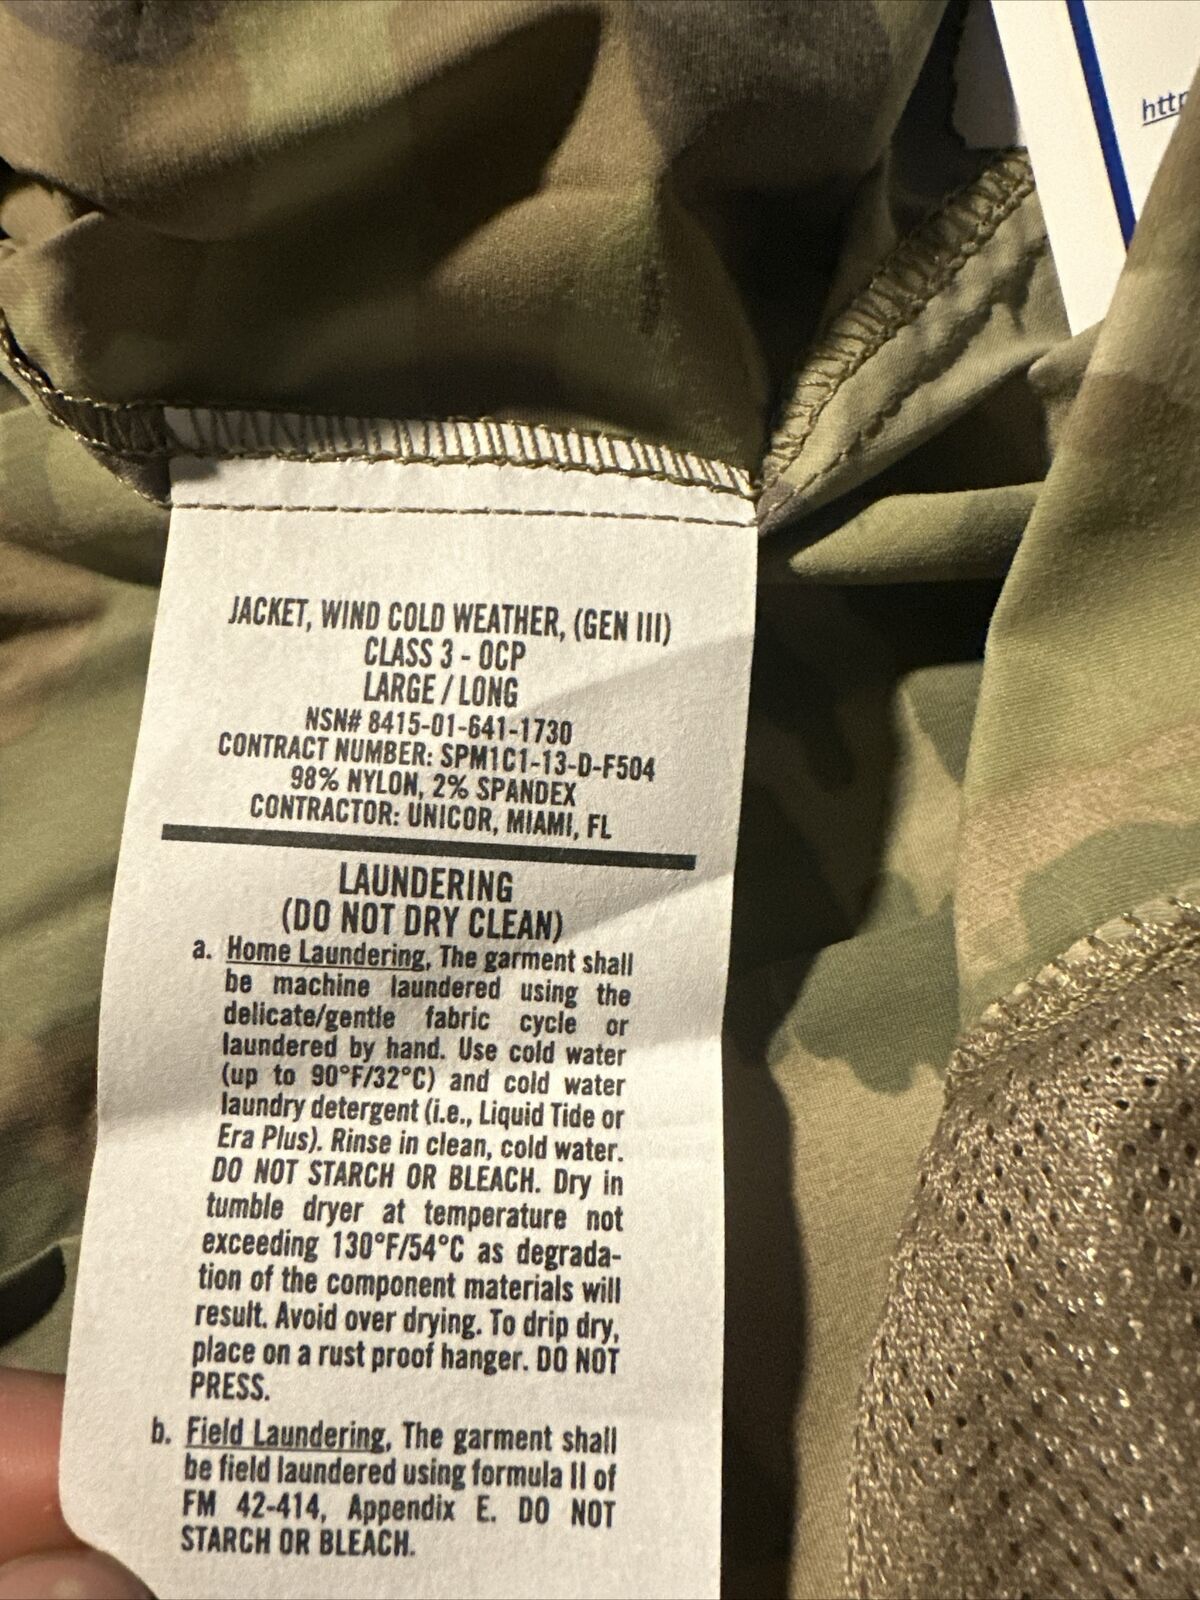 Jacket, Wind Cold Weather (GEN lll) Class 3 OCP LARGE/LONG